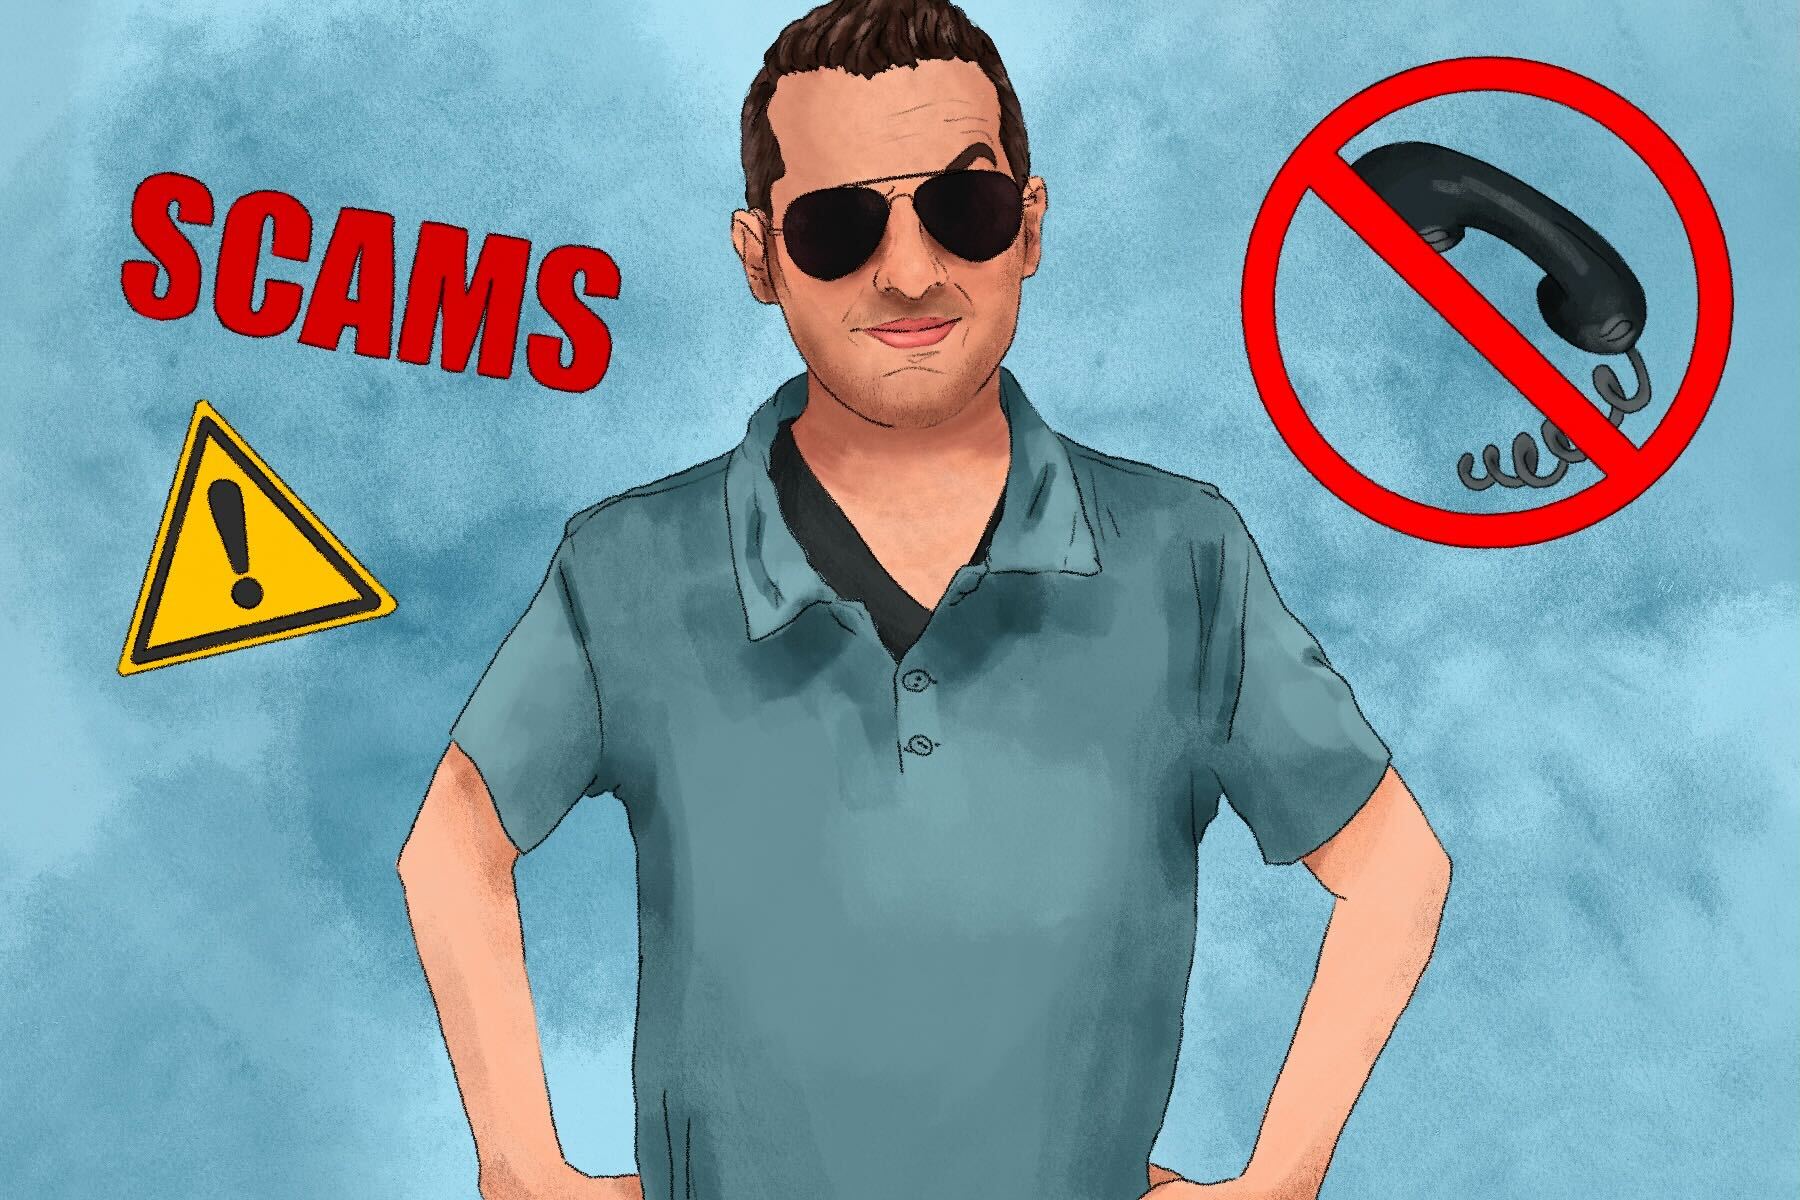 Illustration of Kitboga in an article about scams